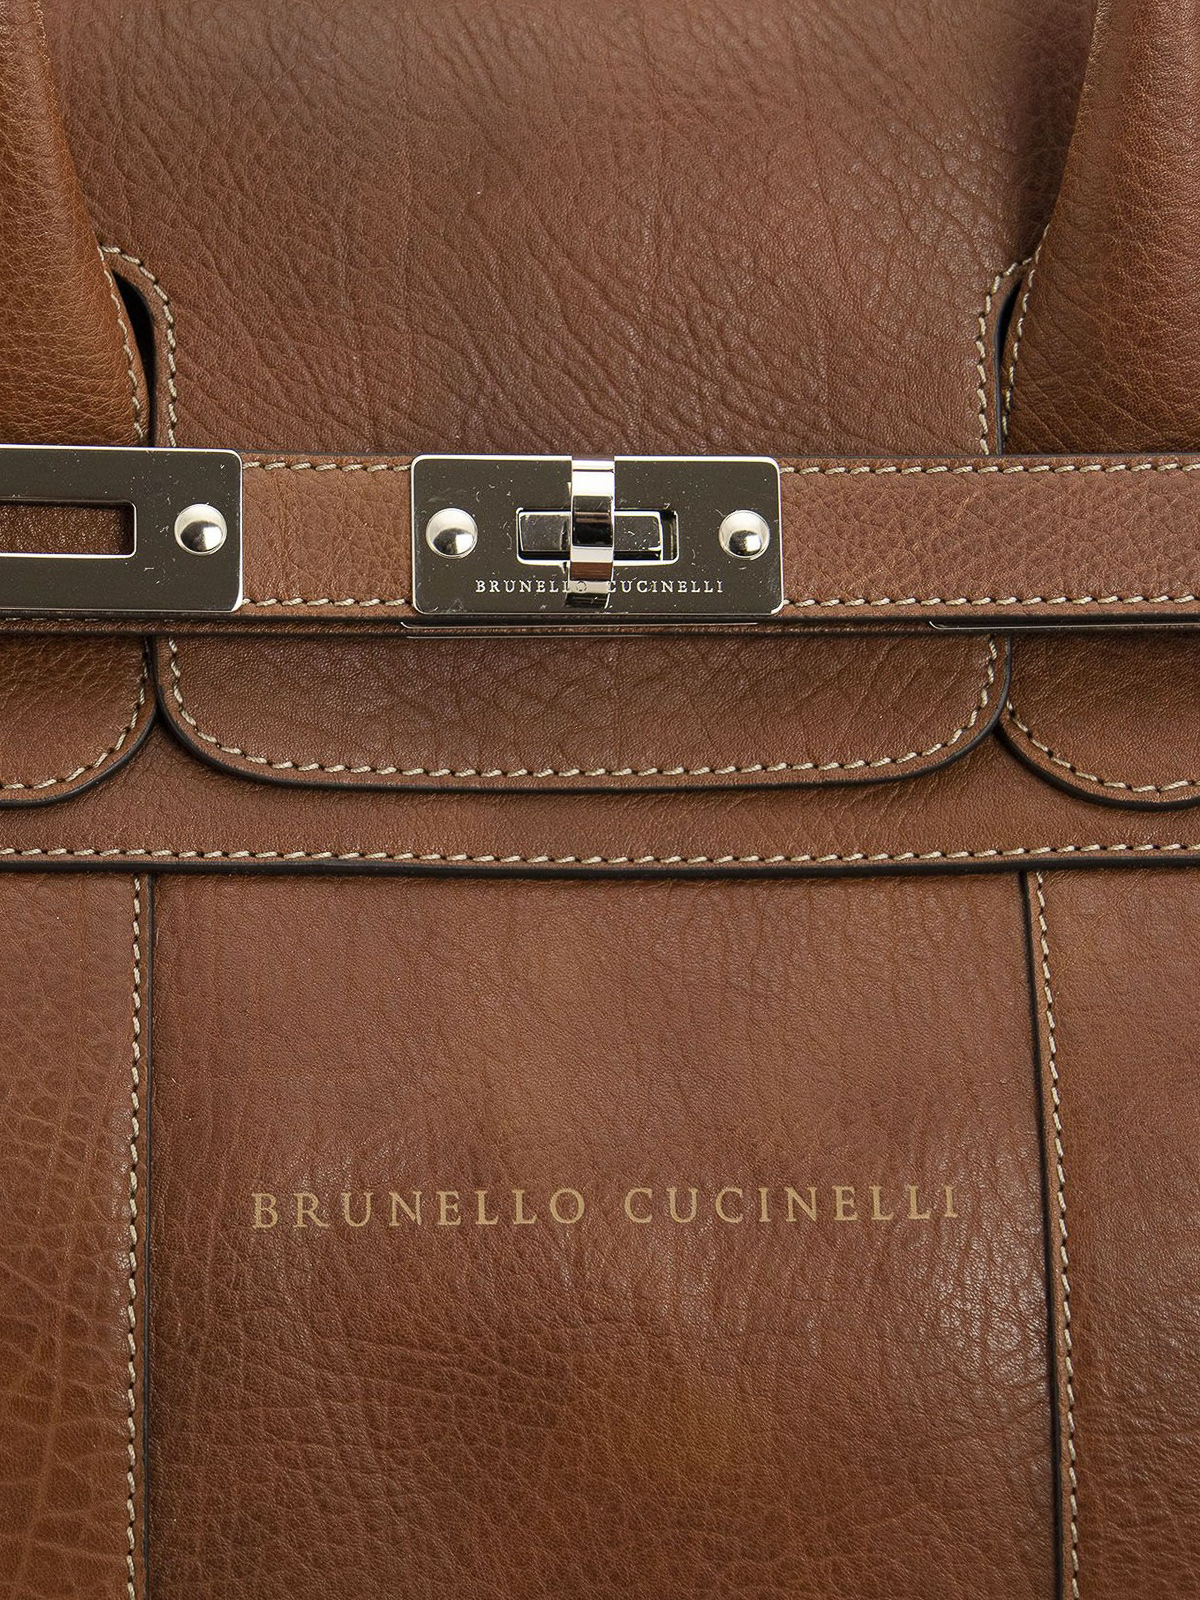 Brunello Cucinelli Grained-leather Garment Bag in Brown for Men